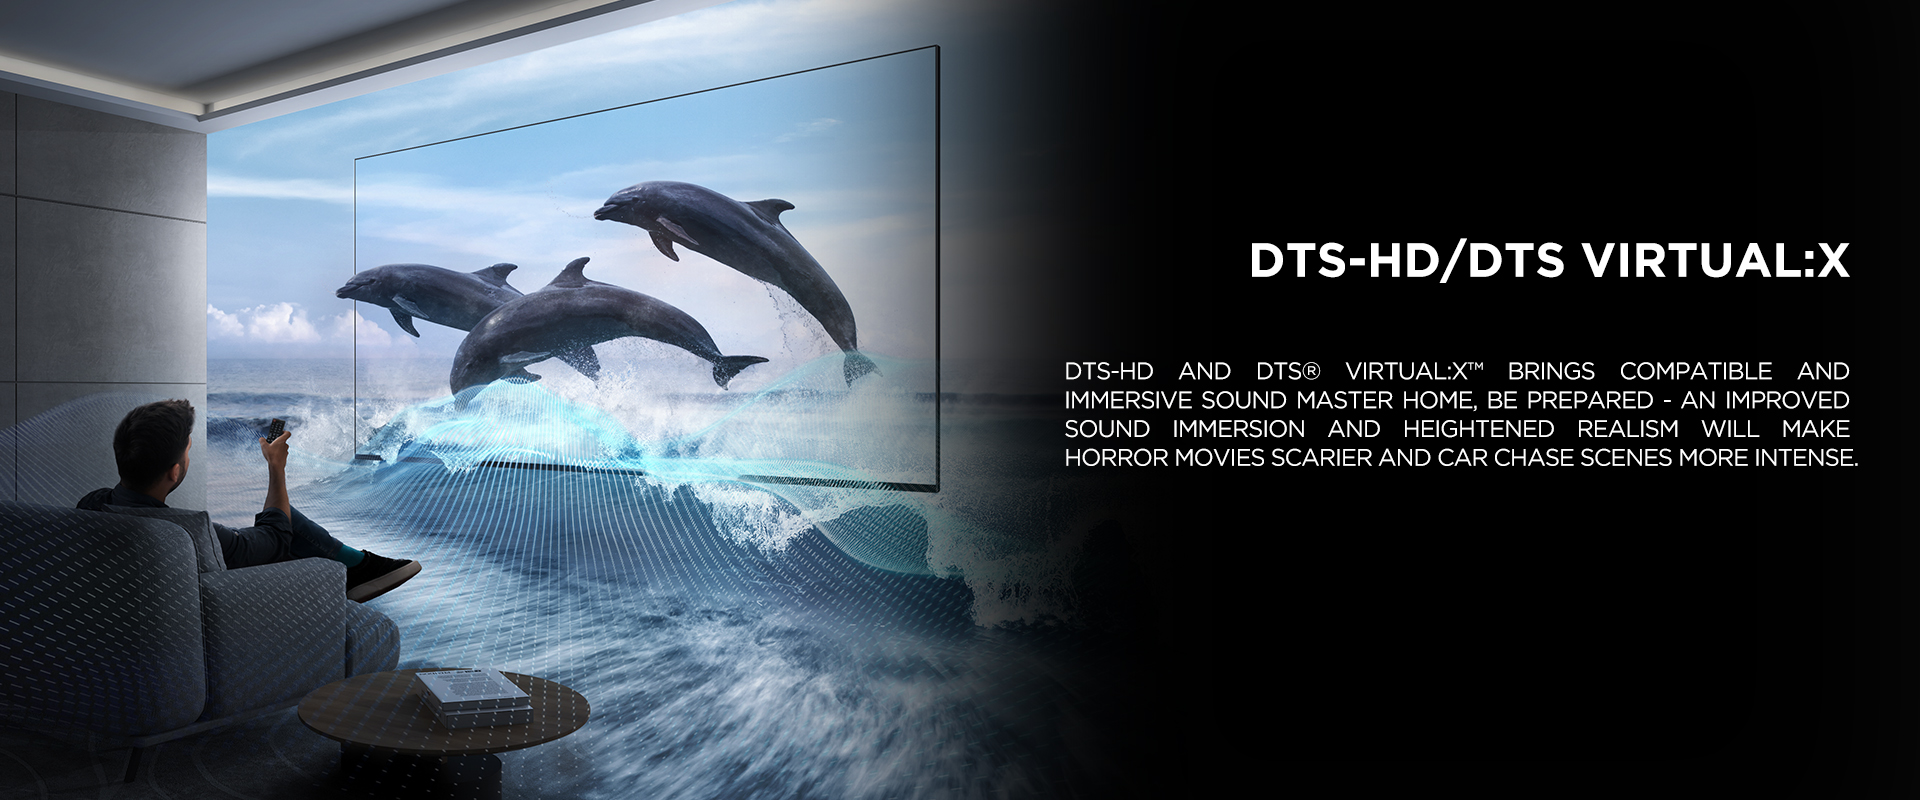 DTS-HD/DTS Virtual:X - DTS-HD and DTS?? VIRTUAL:X’??ƒ?§ brings compatible and immersive sound master home, be prepared - an improved sound immersion and heightened realism will make horror movies scarier and car chase scenes more intense.